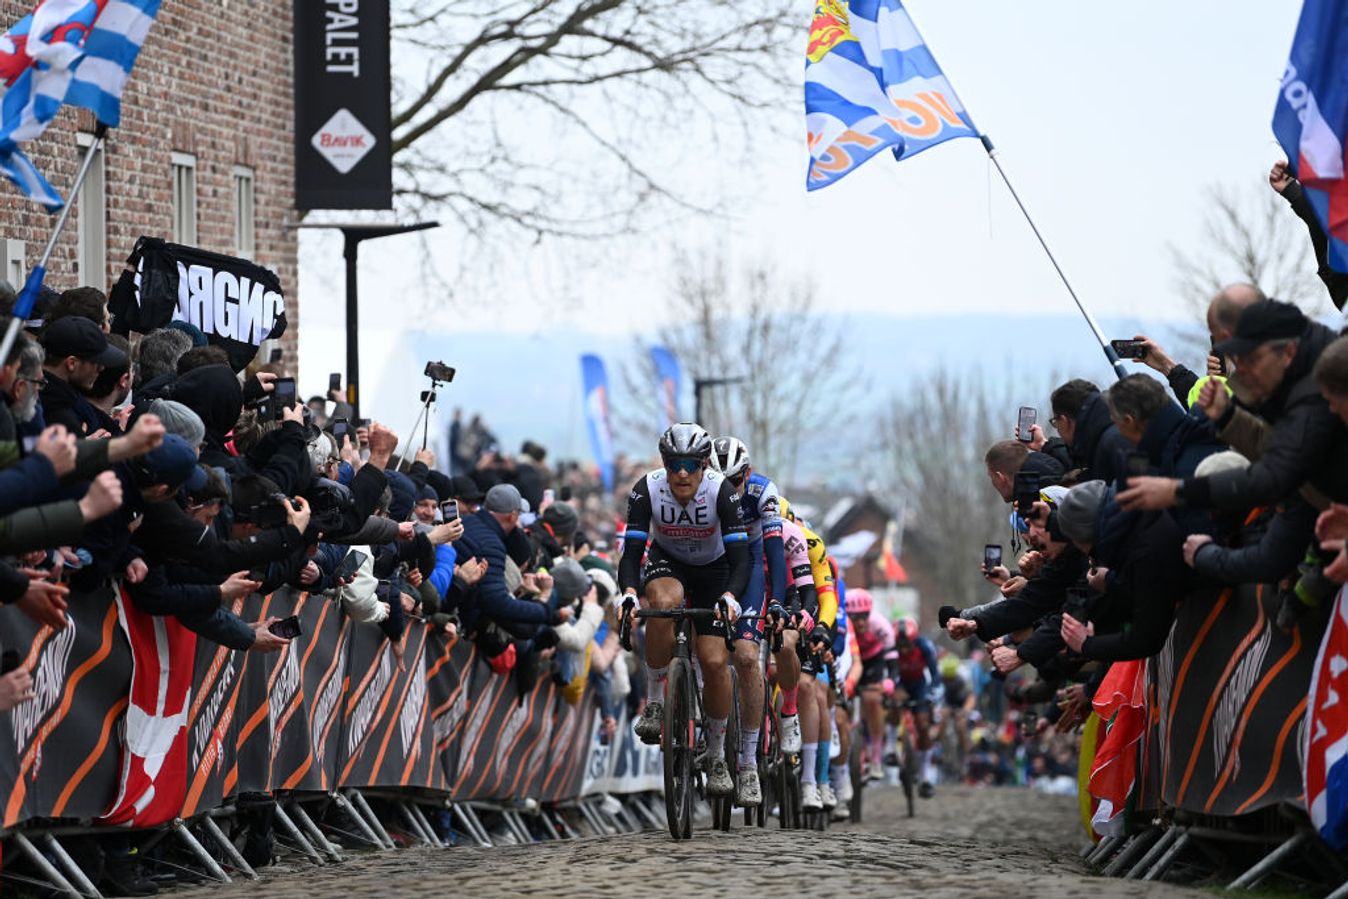 Riders on the middle part of the Oude Kwaremont during the Tour of Flanders